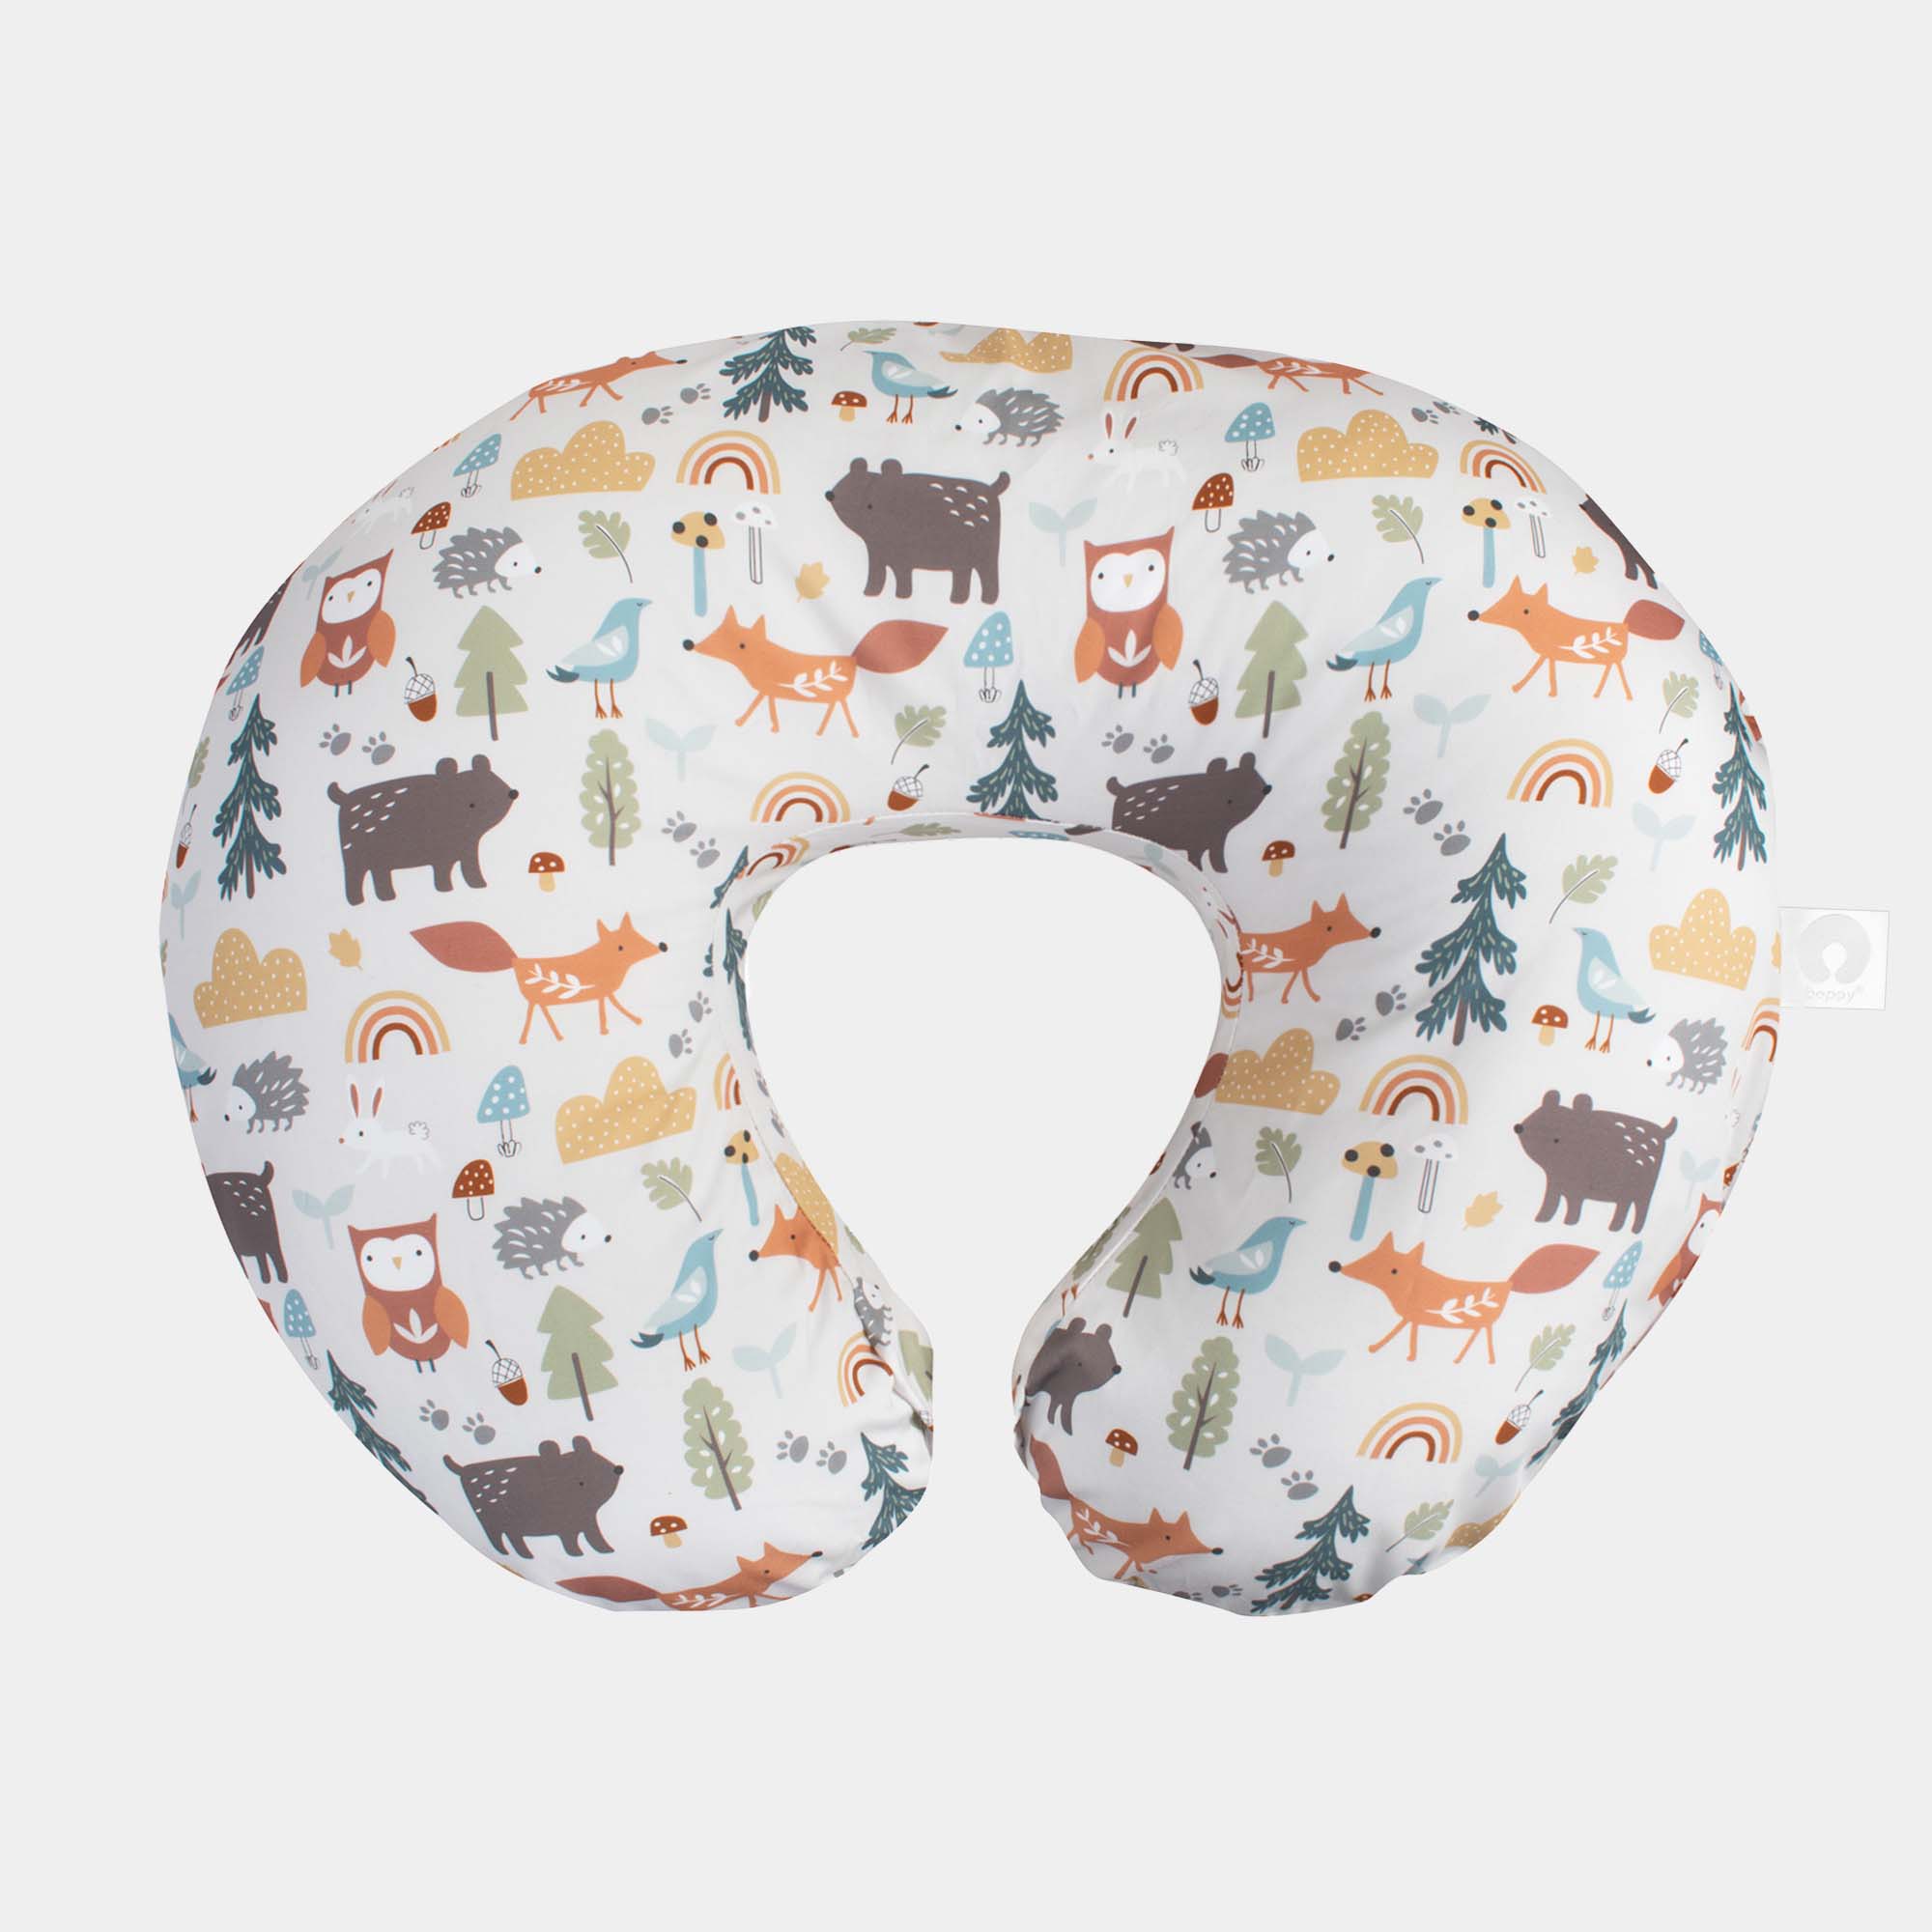 Award-Winning Nursing Pillow with Washable Cover